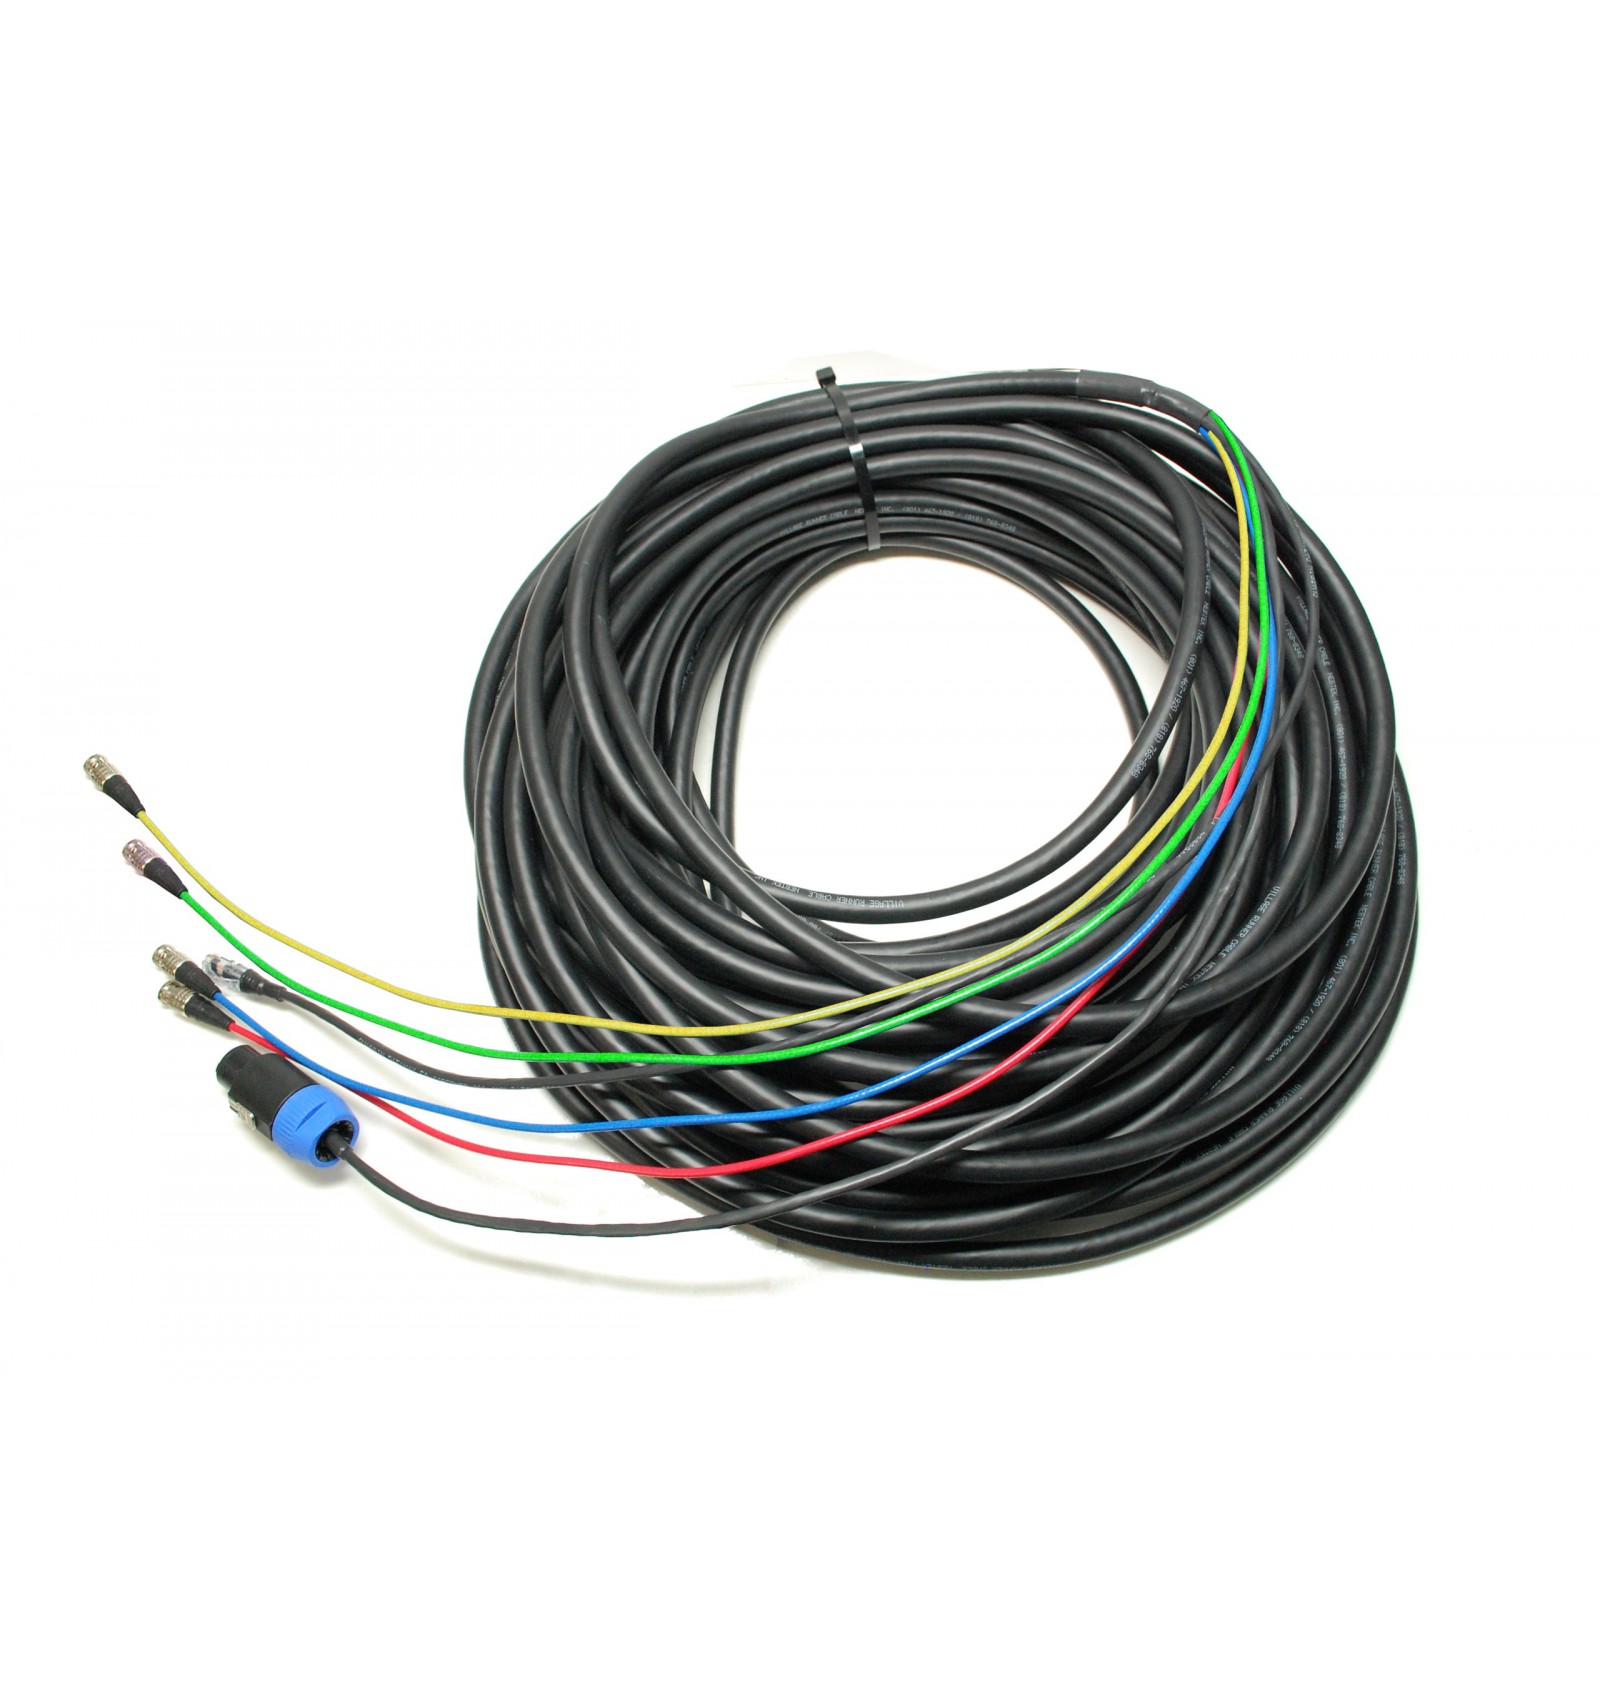 https://store.nebtek.com/3200-thickbox_default/village-runner-cable-with-4-sdi-lines-2-audio-pairs-1-ethernet-and-speakon.jpg